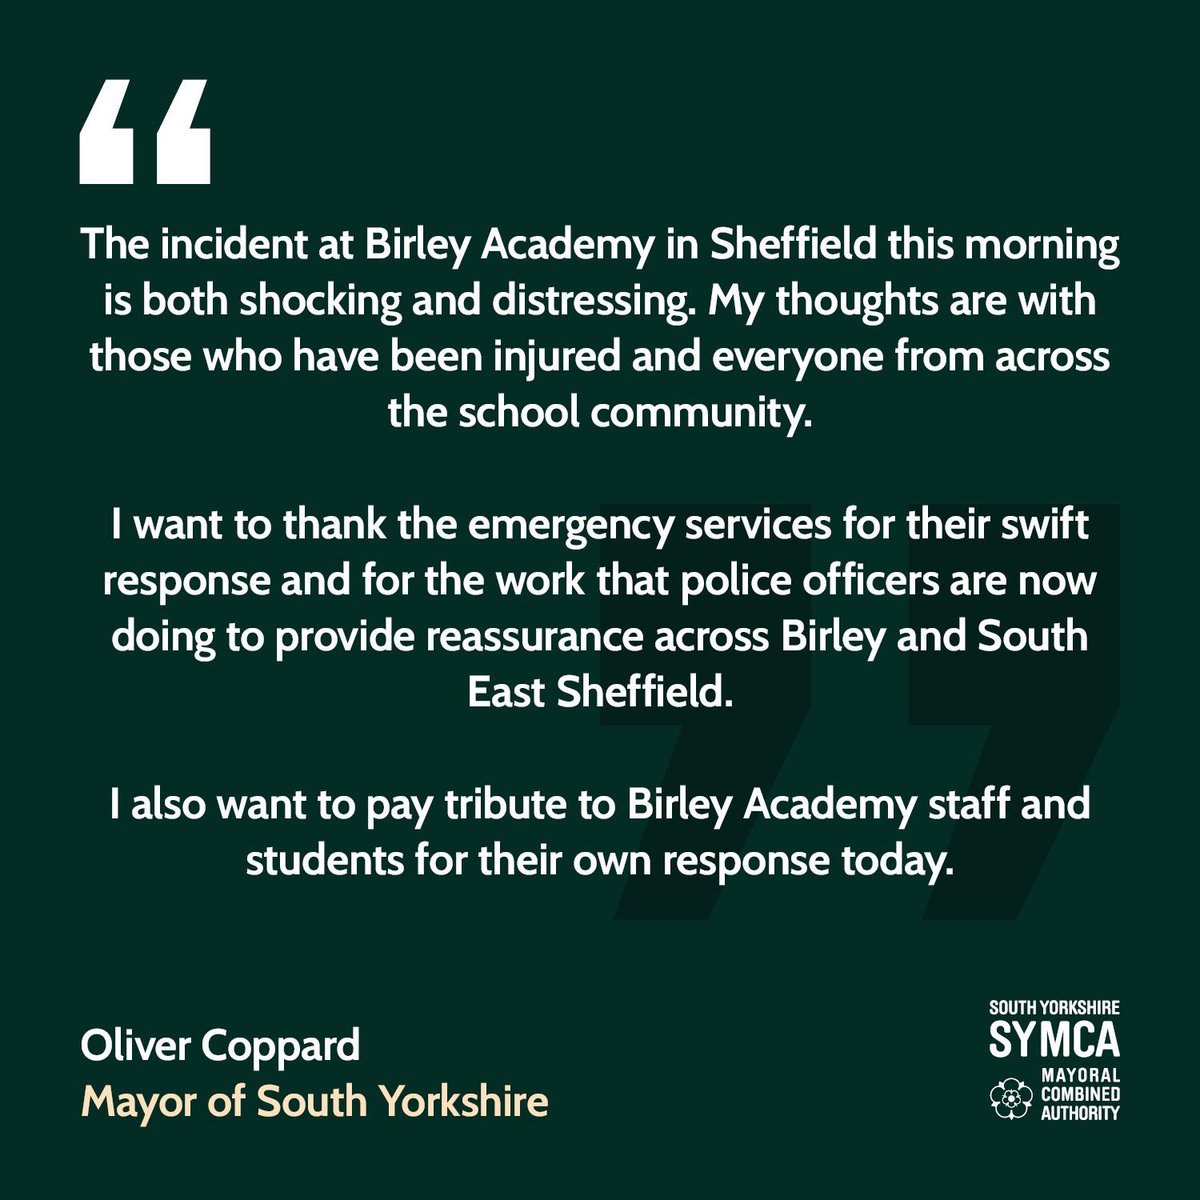 My response to this morning’s incident at Birley Academy